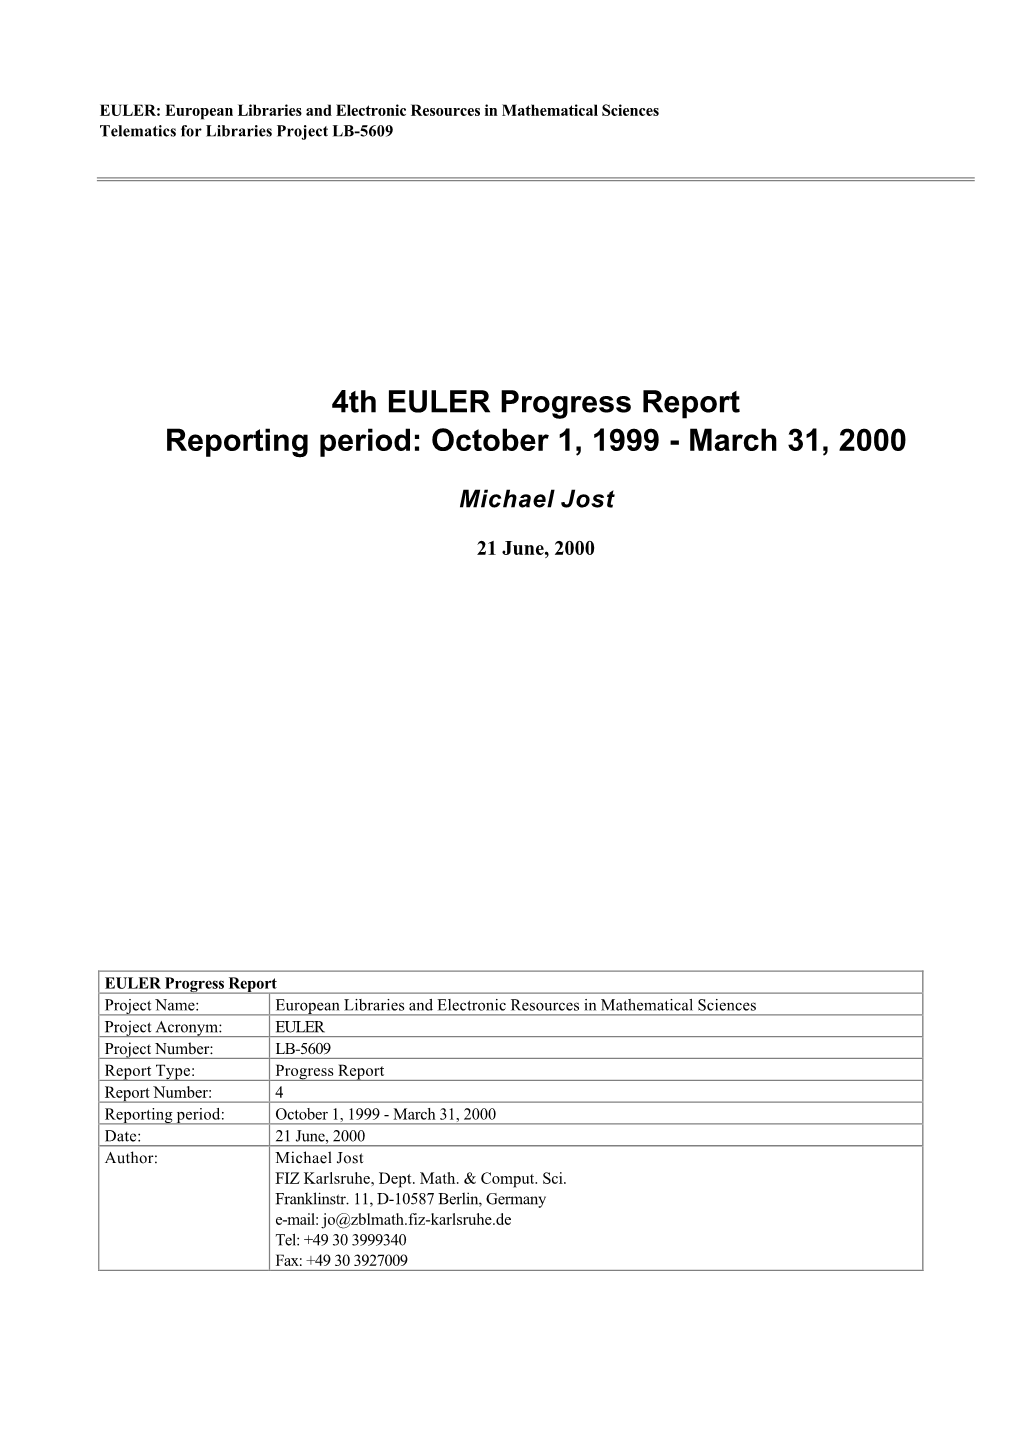 4Th EULER Progress Report Reporting Period: October 1, 1999 - March 31, 2000